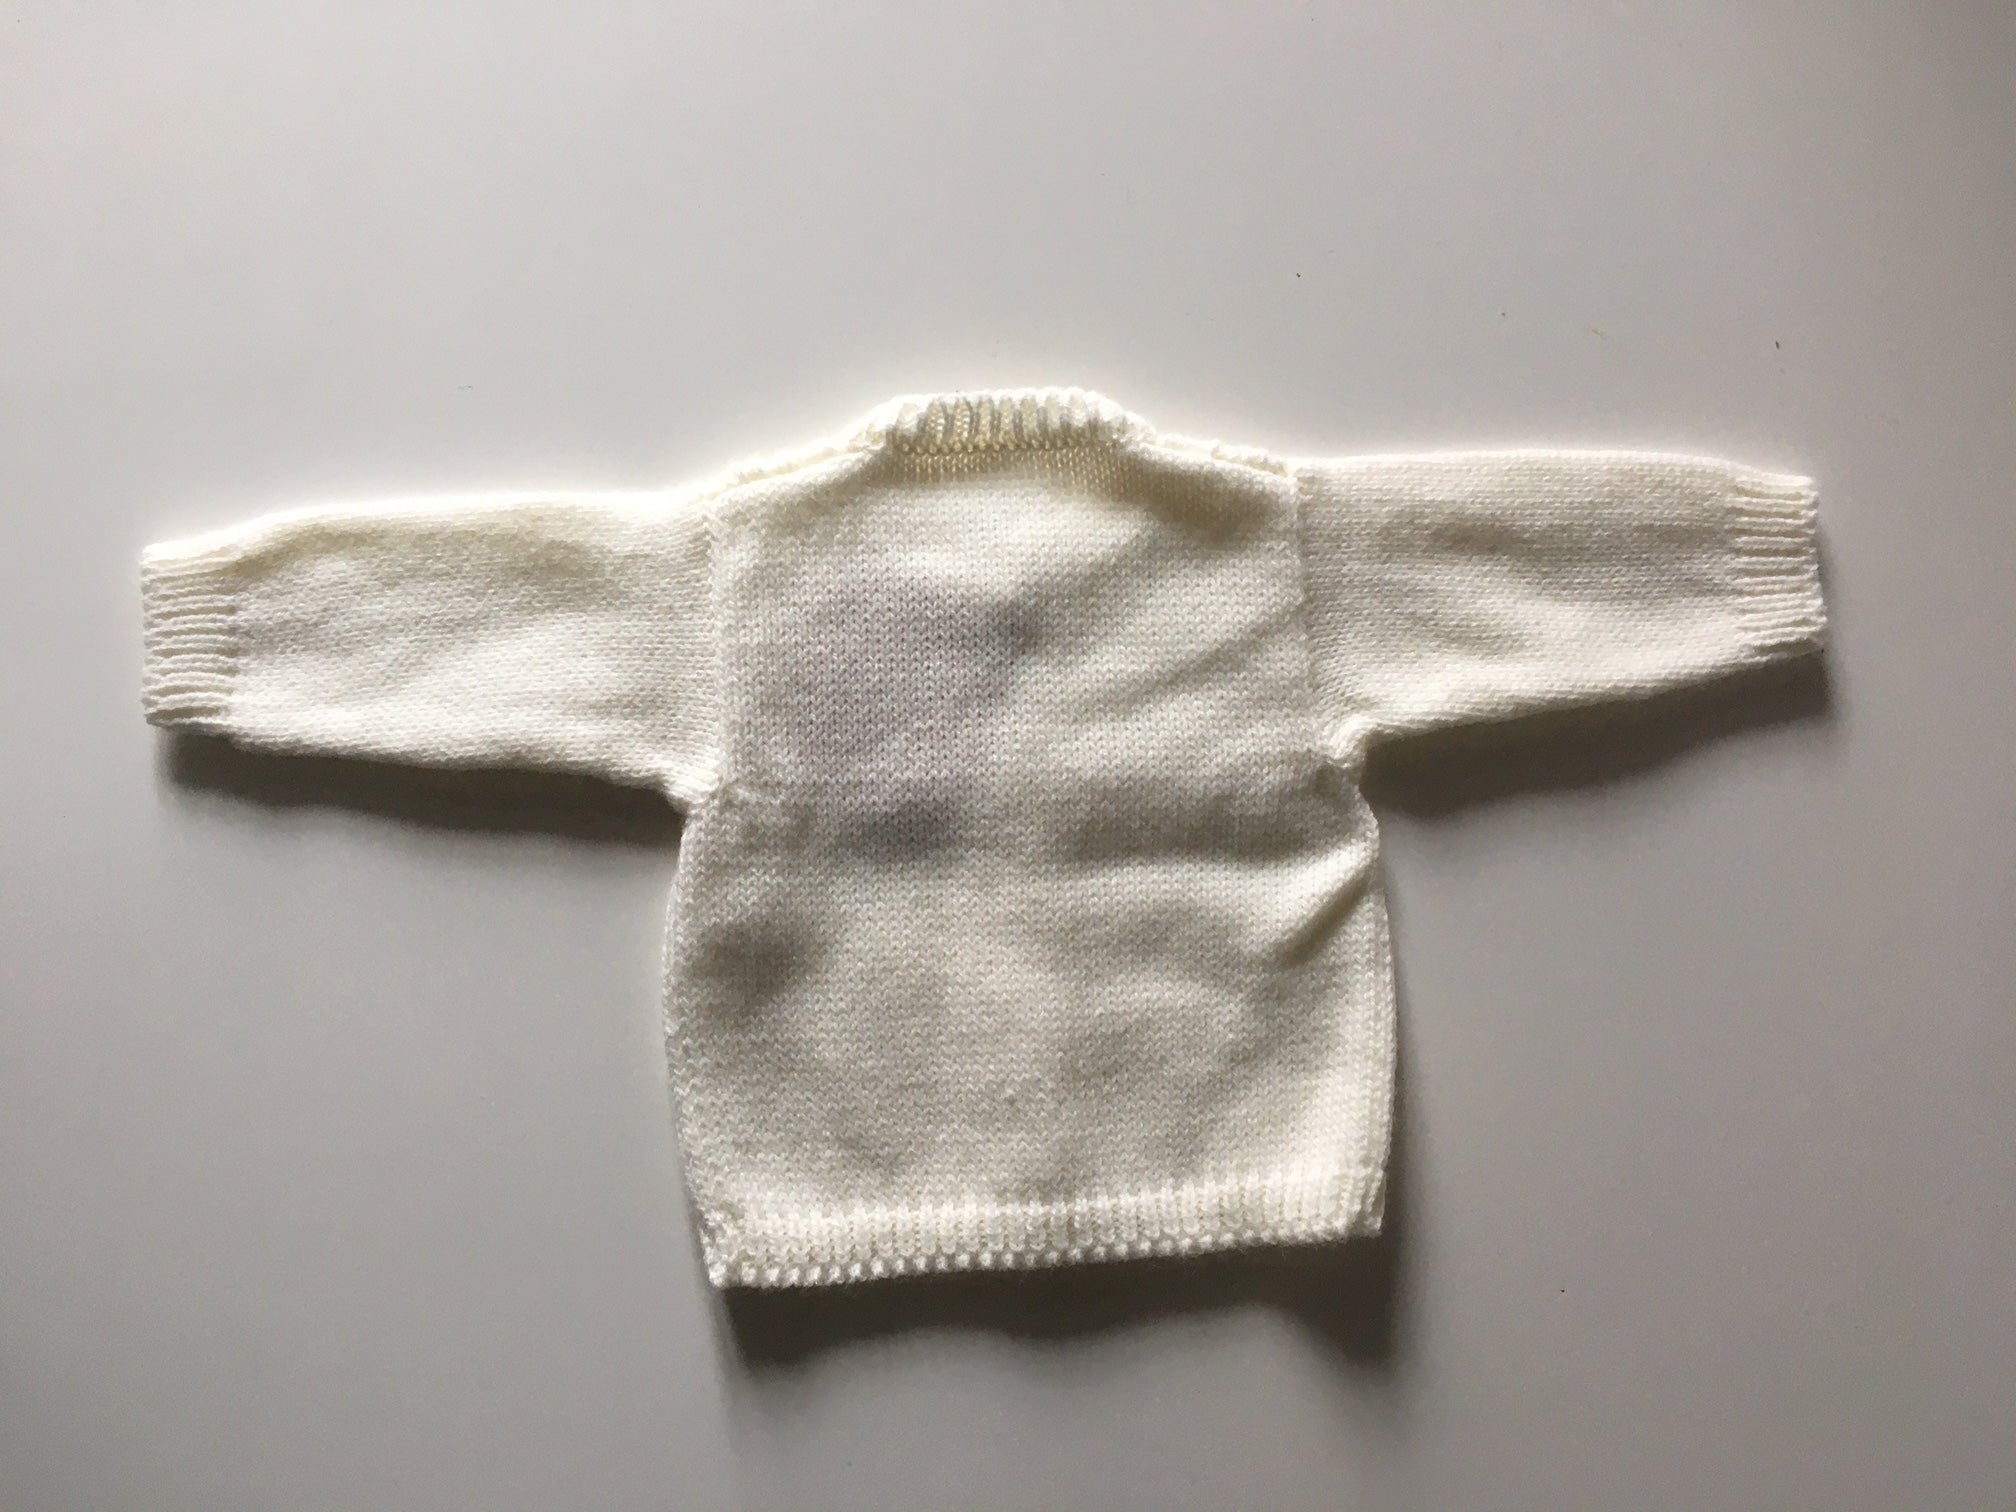 Spring/summer baby Cardigan - made by order